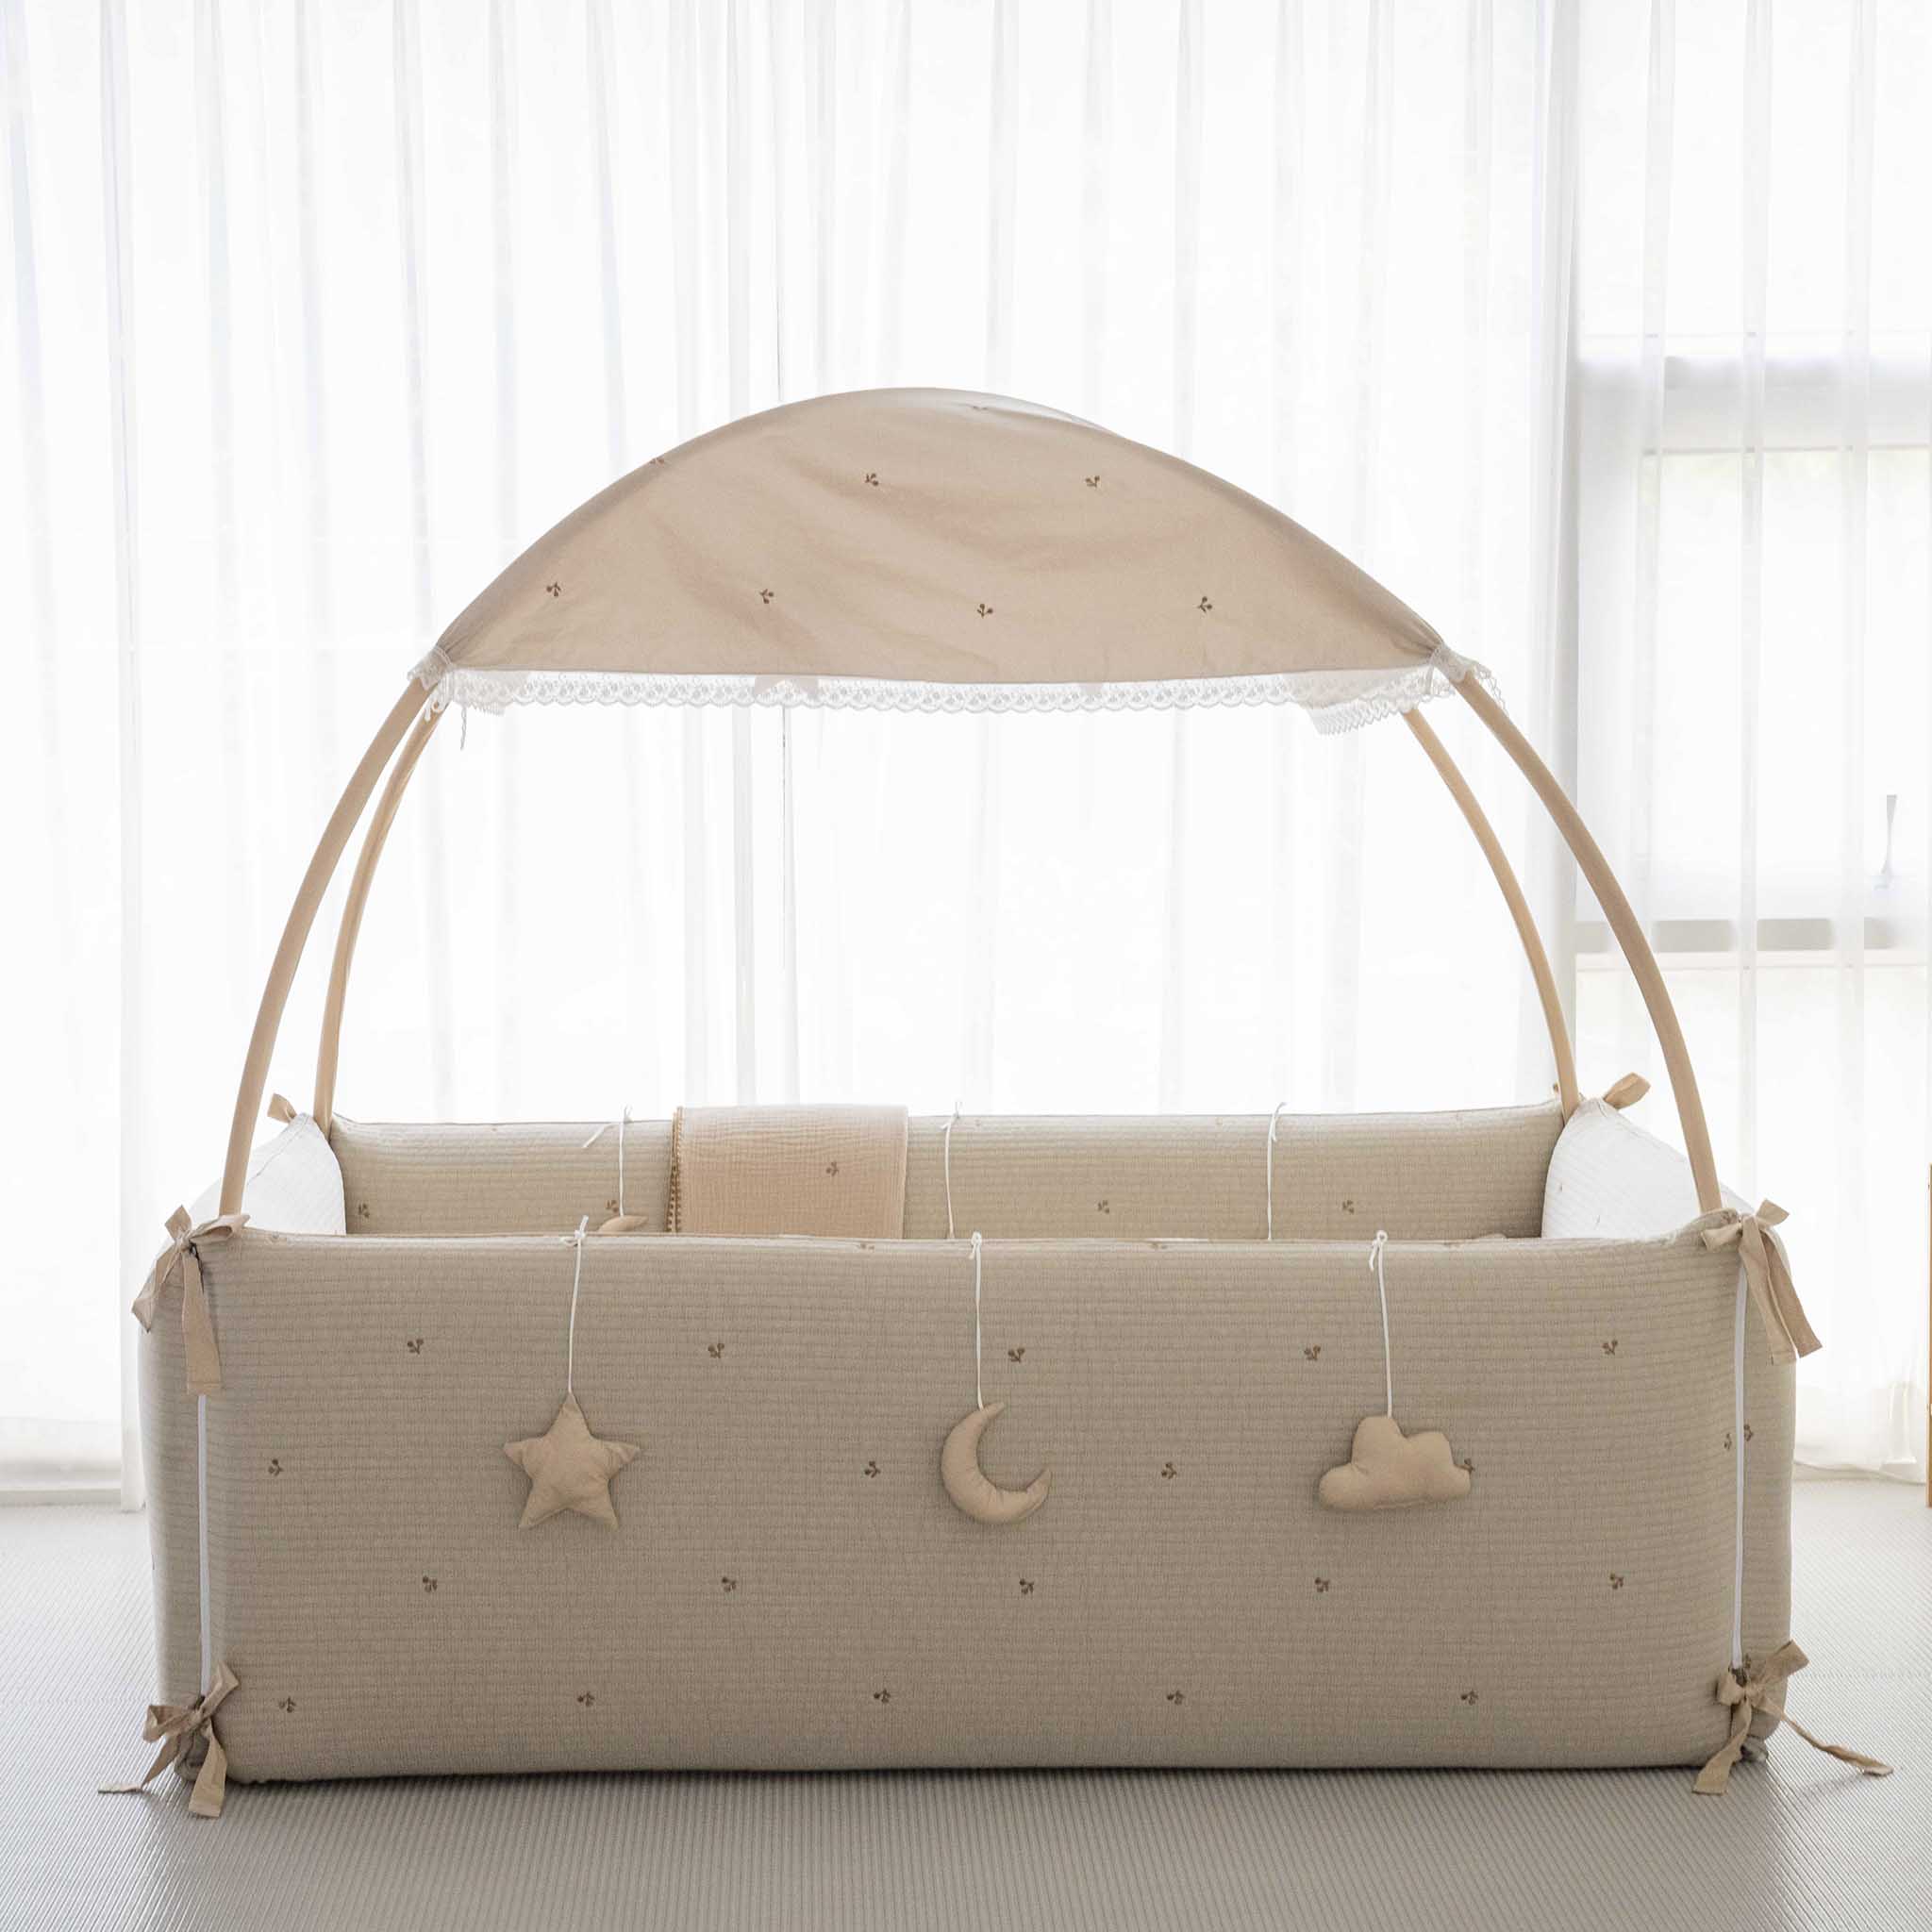 LOLBaby Cotton Embroidery Bumper Bed with Hanging Toy and Canopy - Cherry Beige